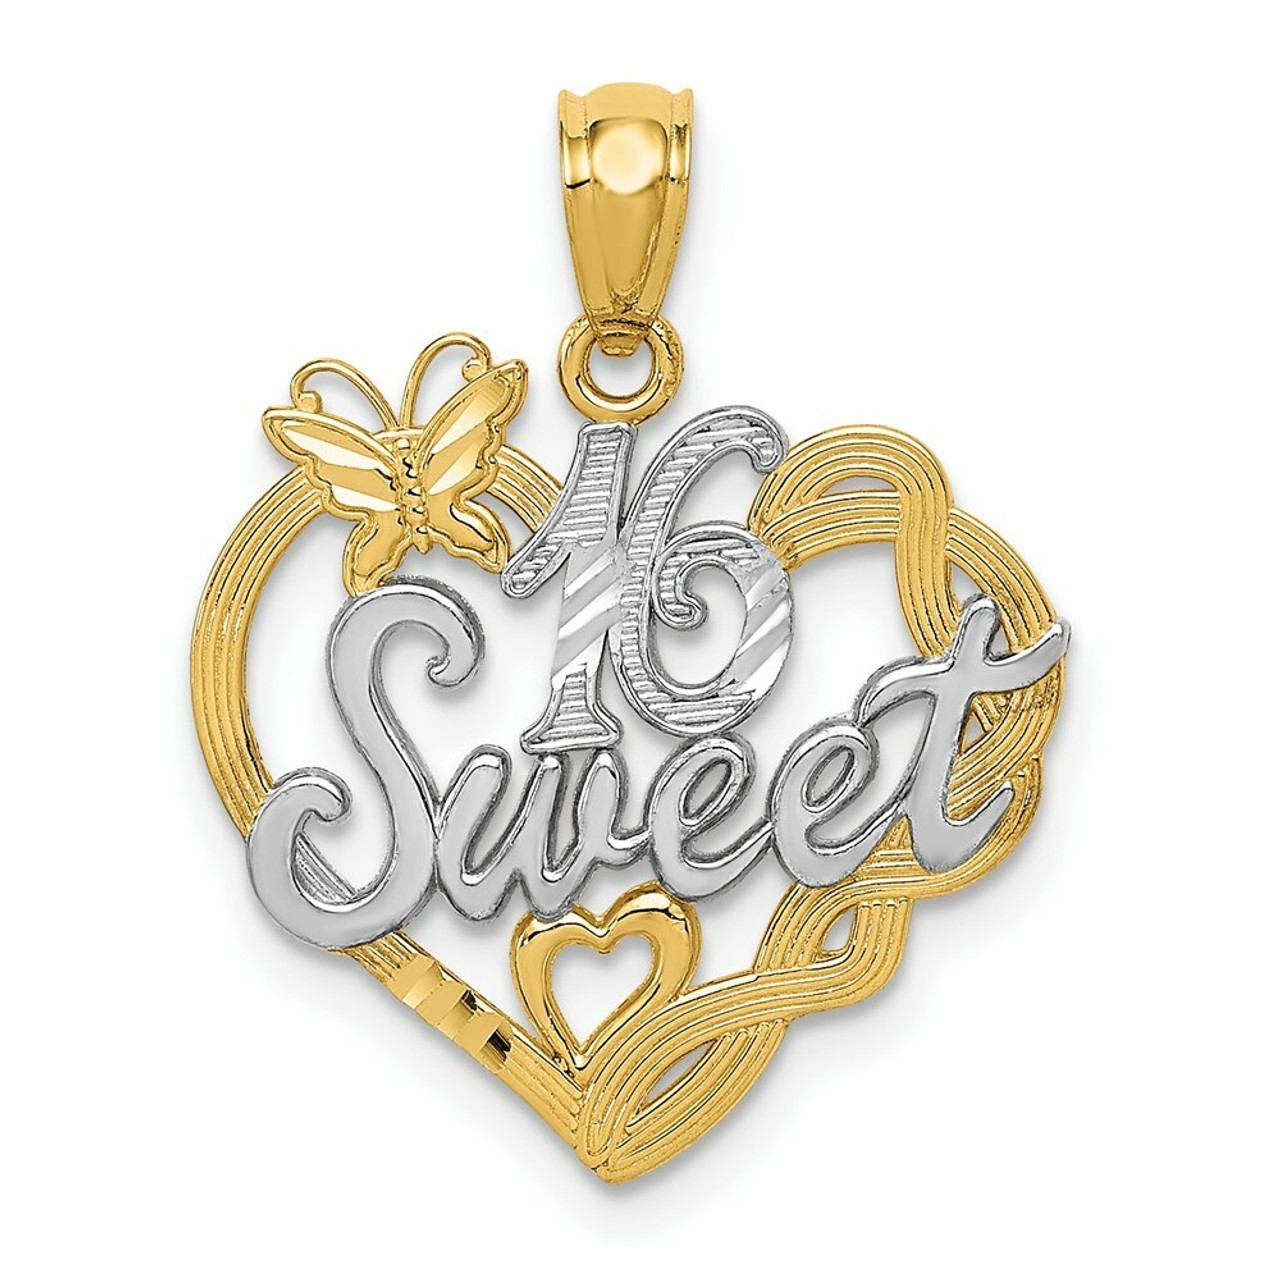 Sweet Sixteen 16th Birthday Necklace Gift By Yatris | notonthehighstreet.com